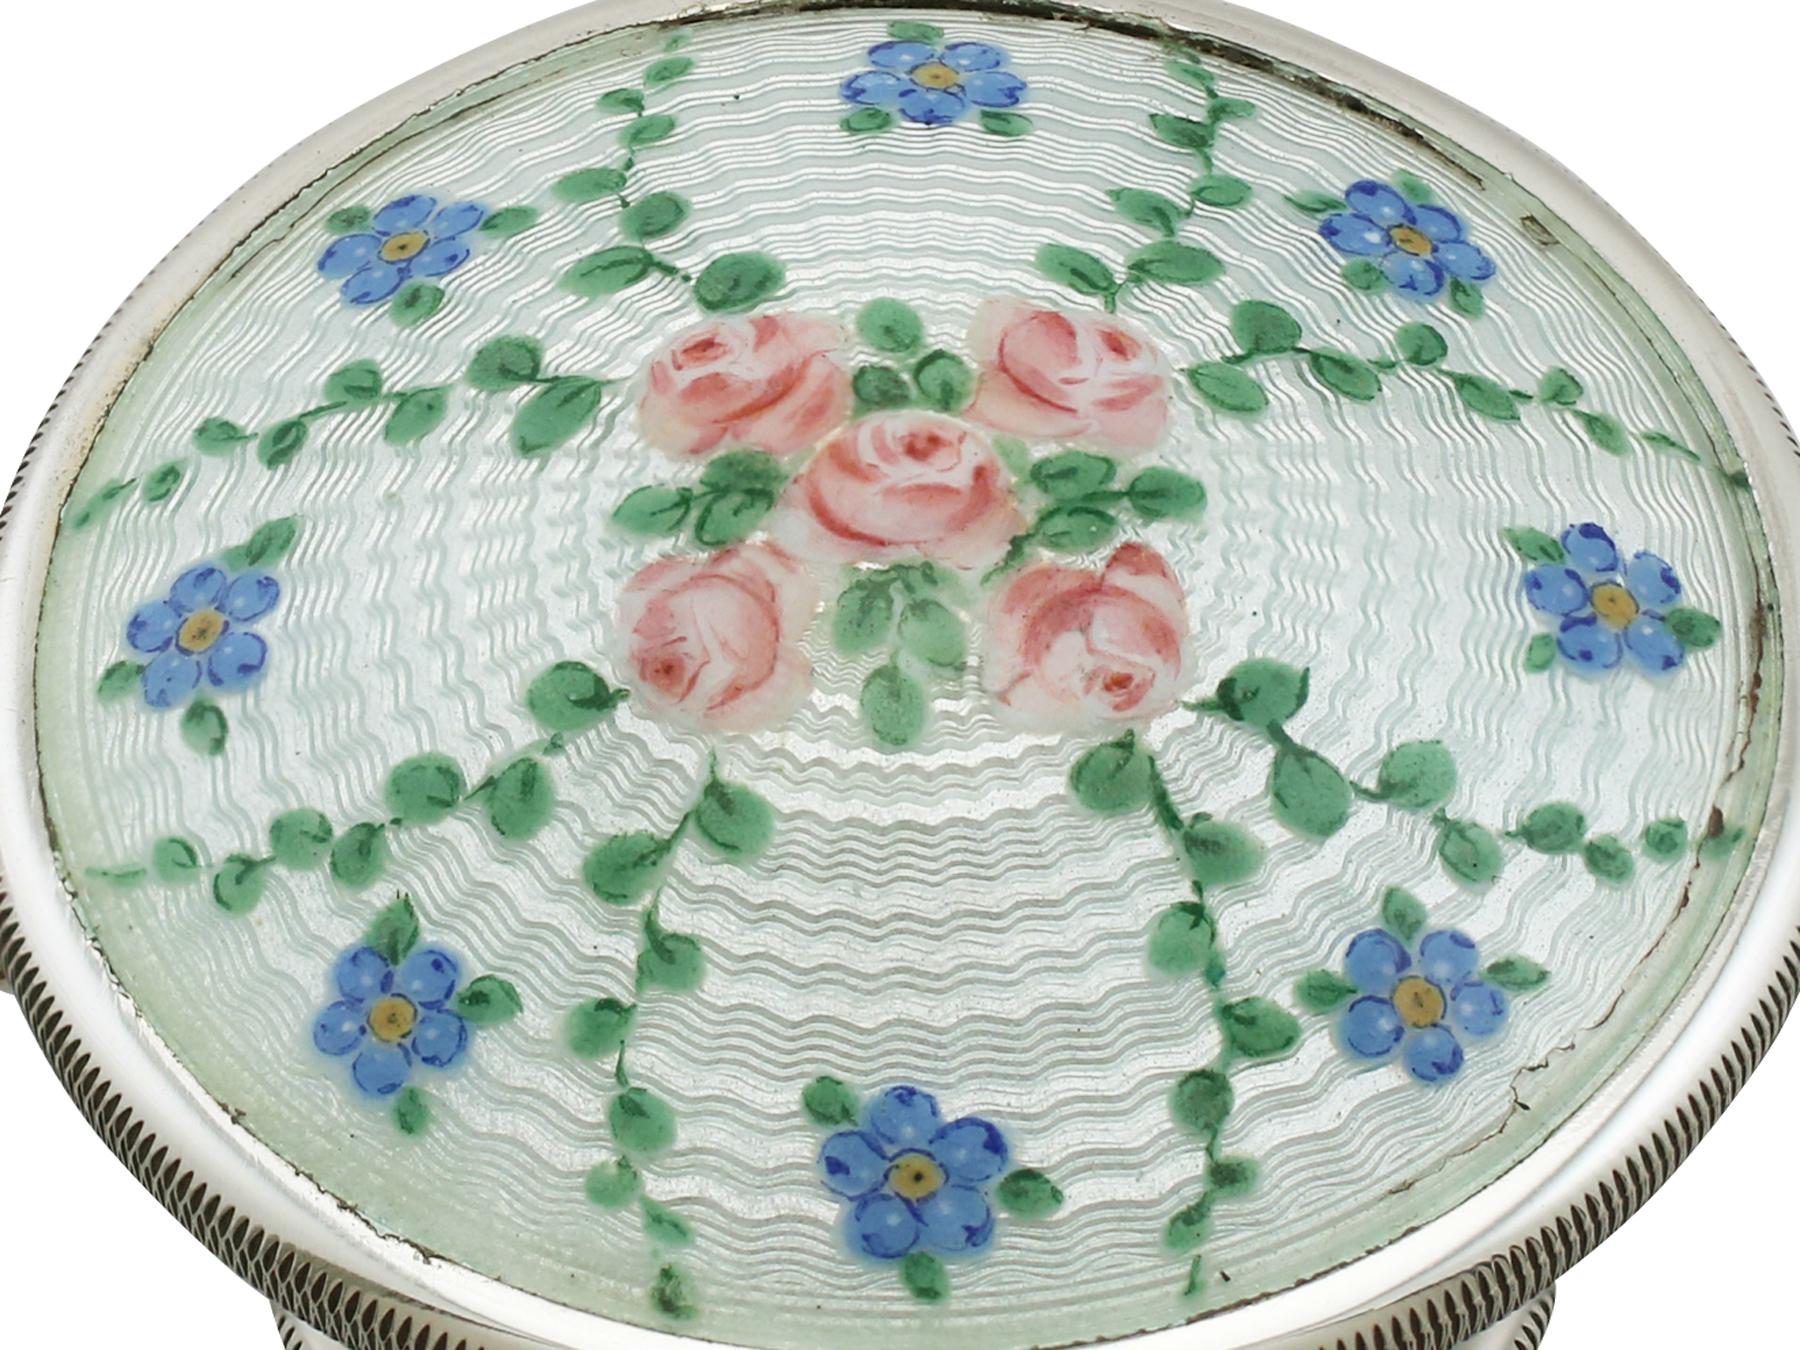 Antique Sterling Silver and Enamel Trinket Box by Levi and Salaman 1